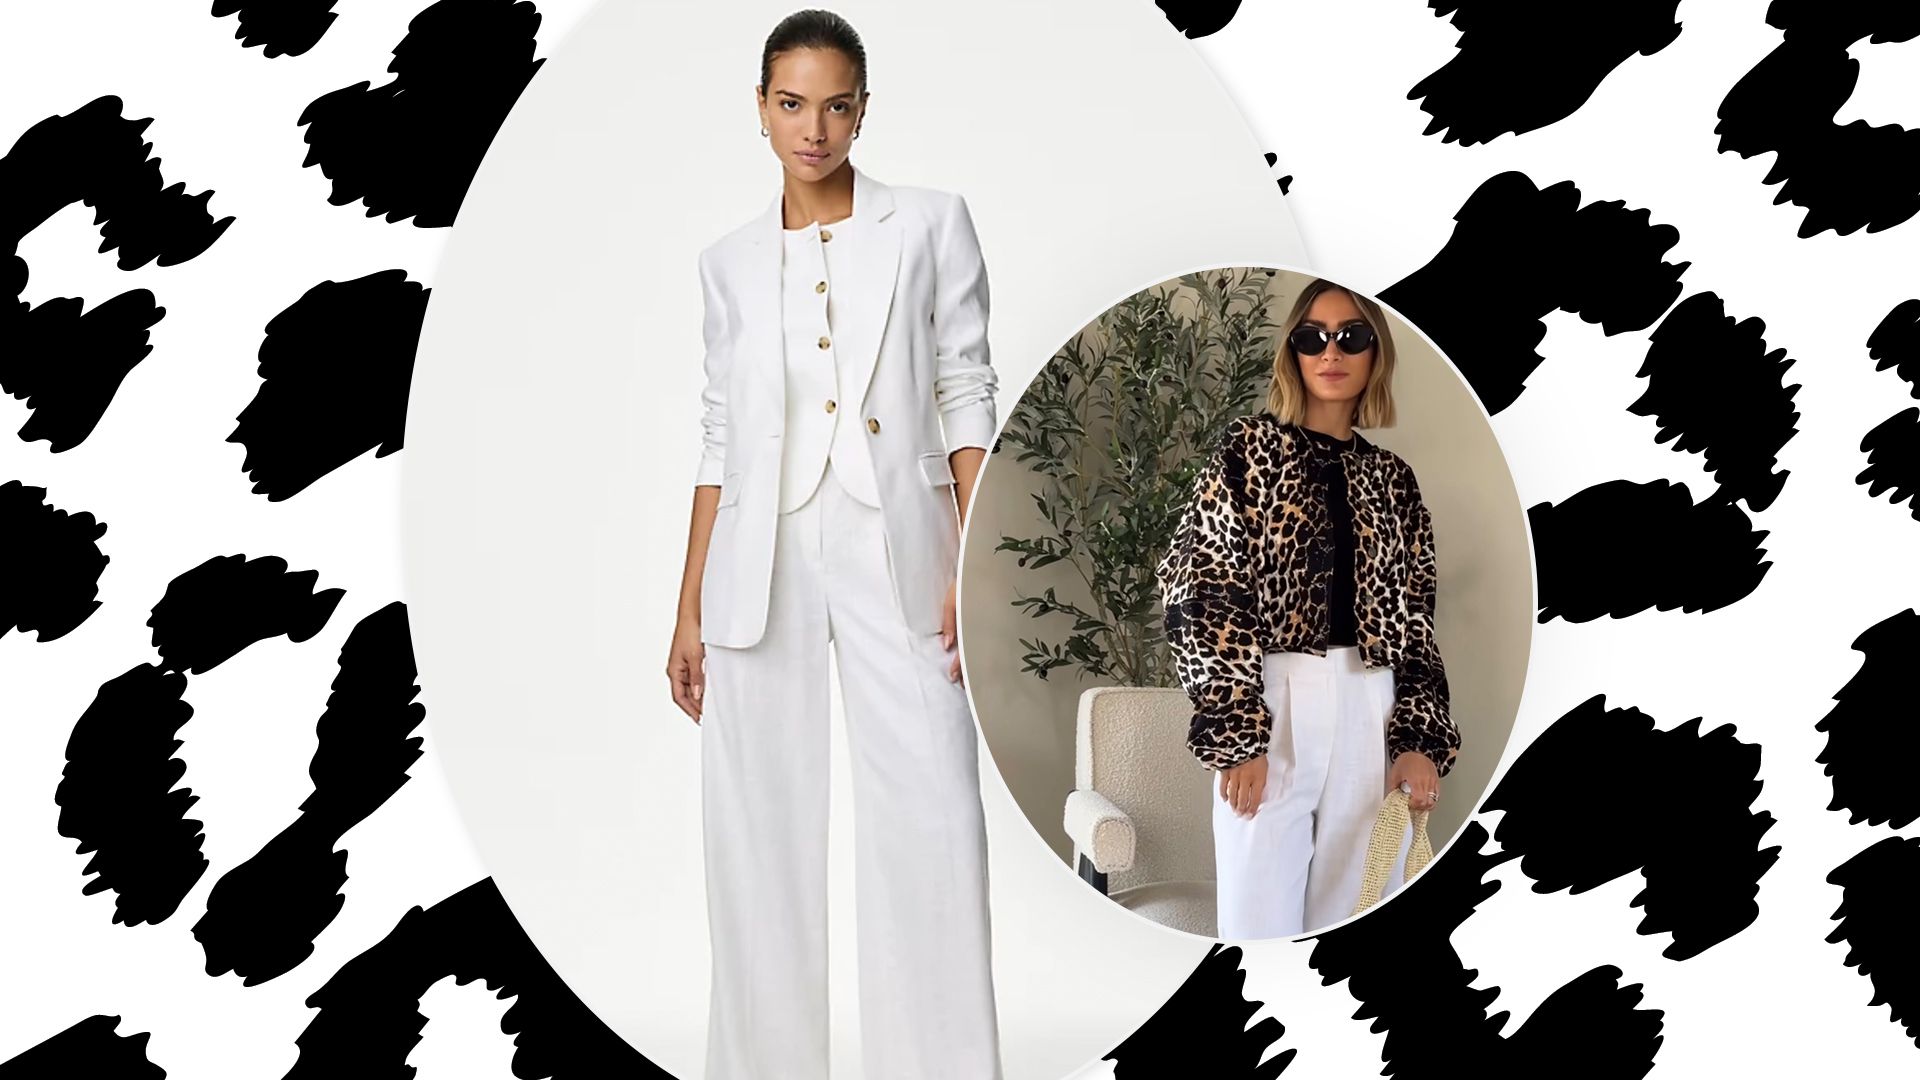 Frankie Bridge has found the 'perfect' white trousers for summer - and they're just £39 at M&S